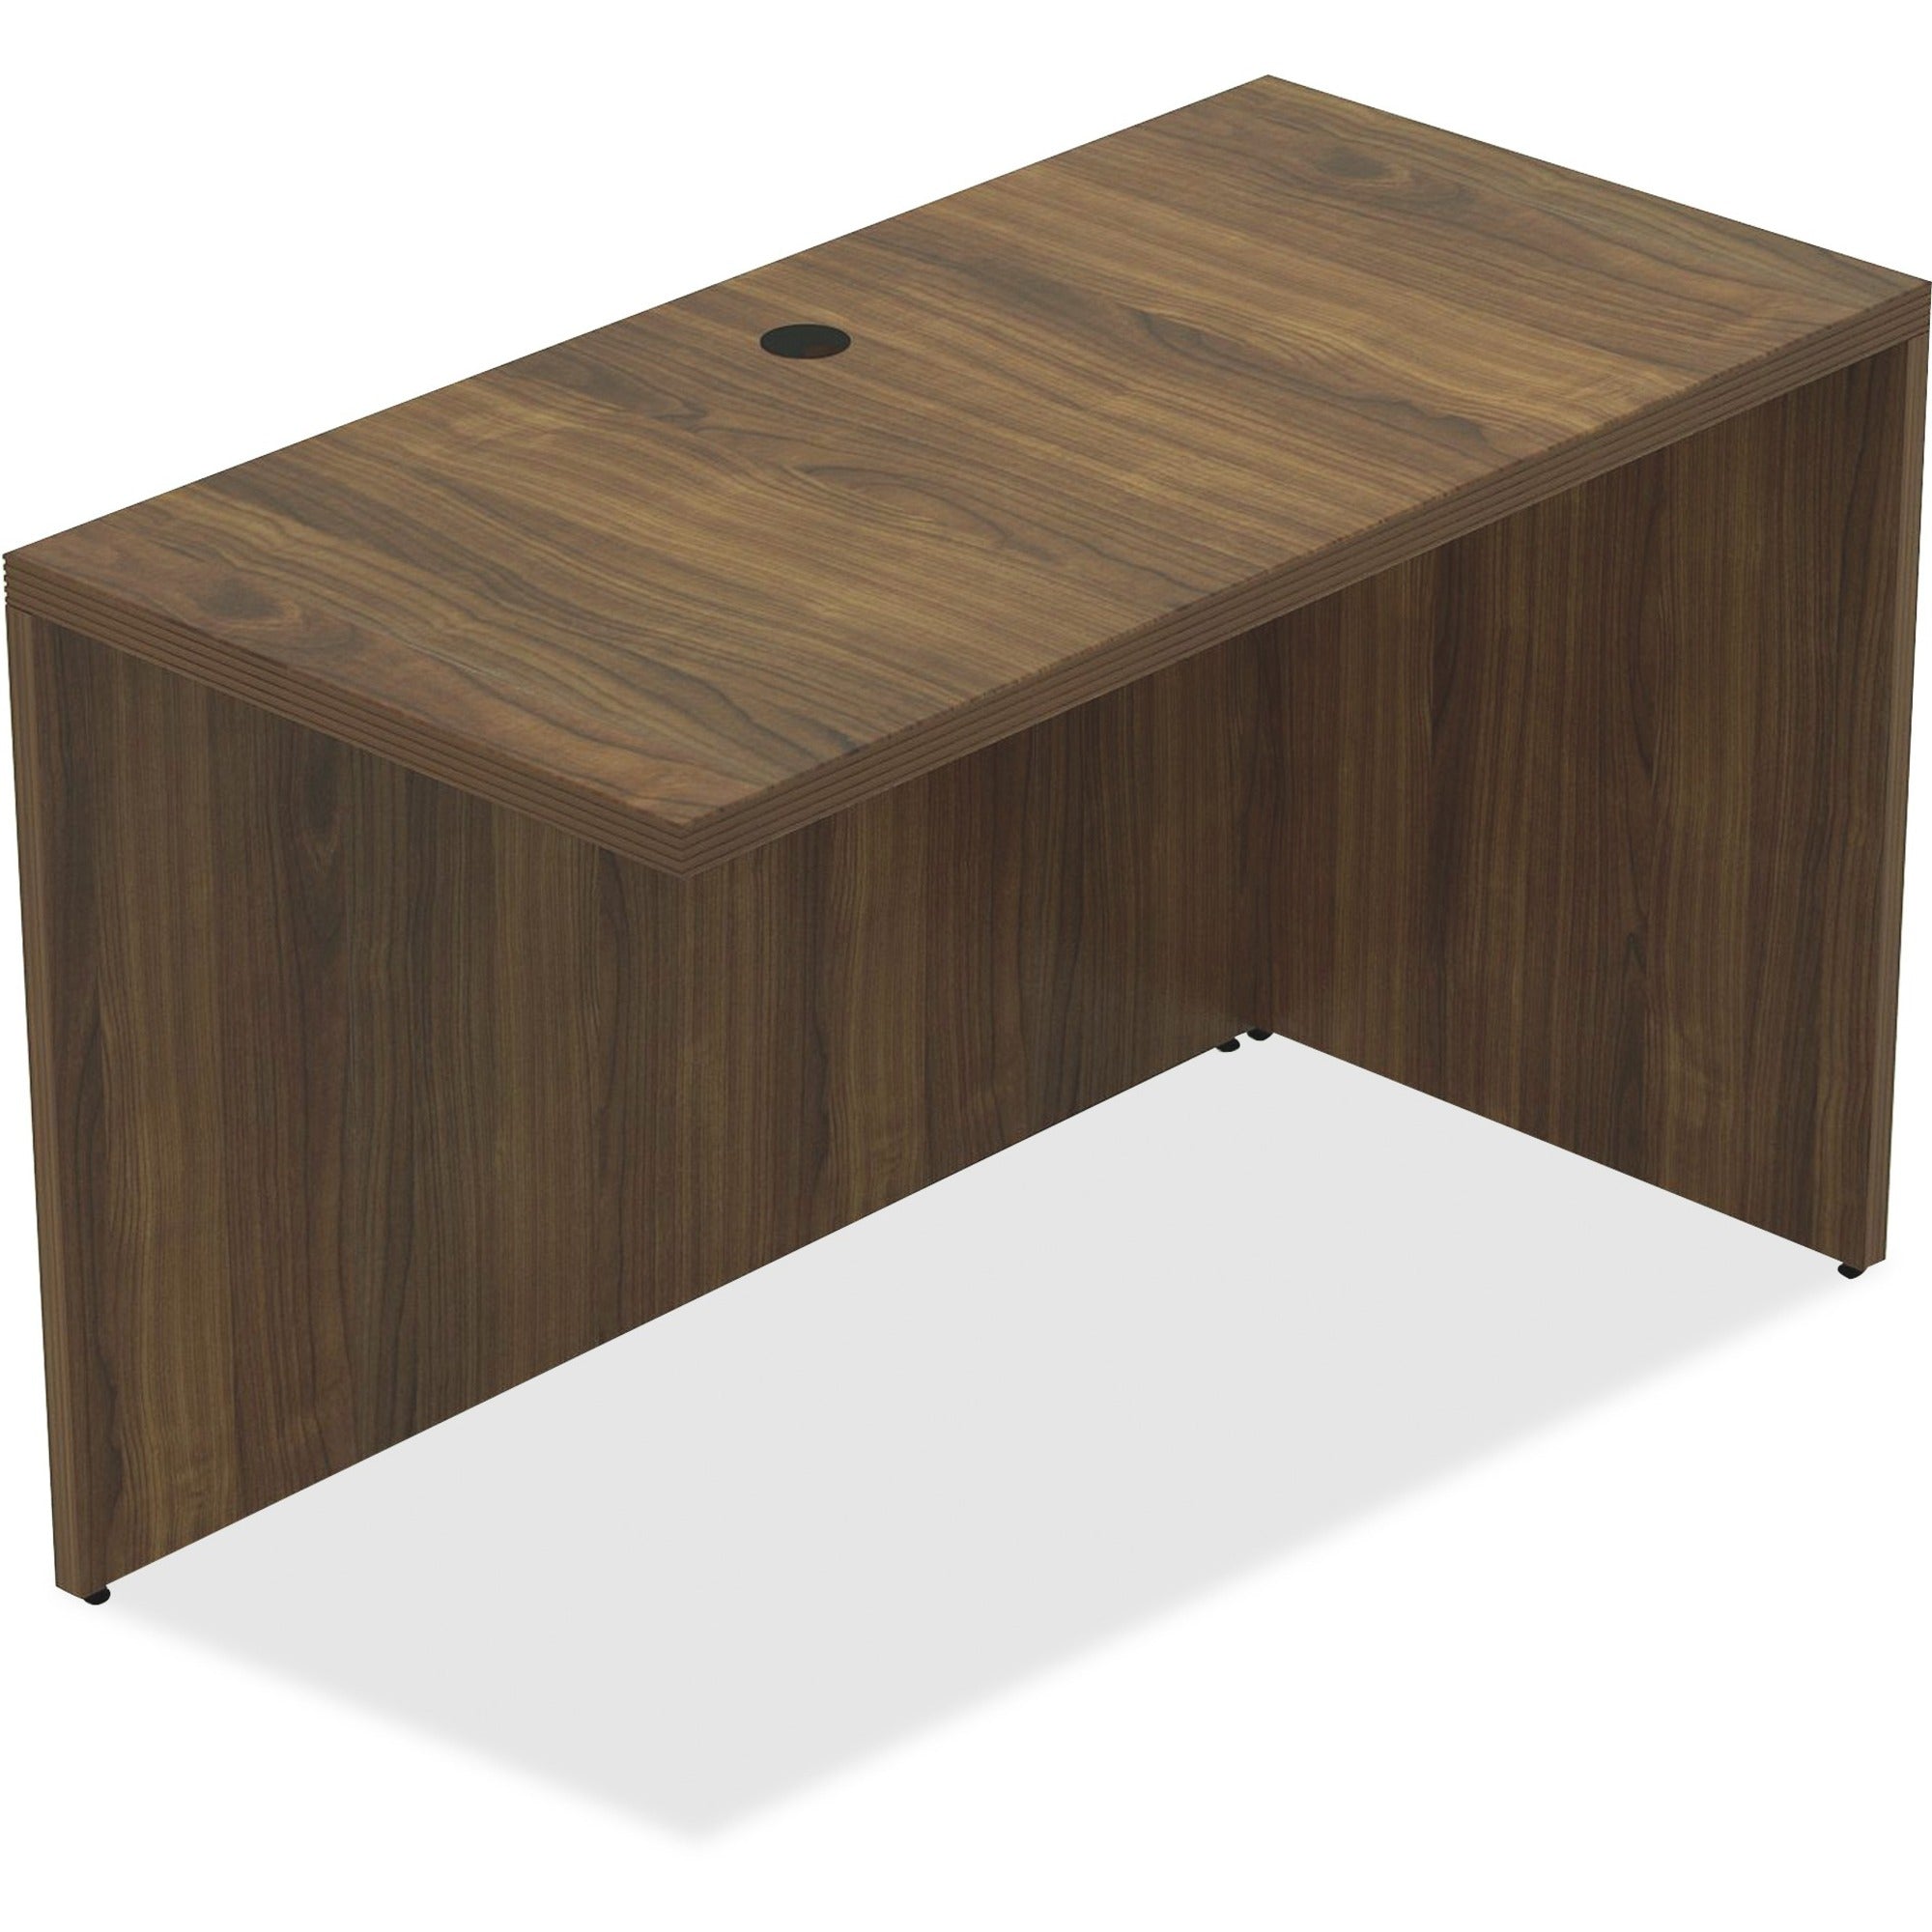 Lorell Chateau Series Return - 47.3" x 23.6"30" Desk, 1.5" Top - Reeded Edge - Material: P2 Particleboard - Finish: Walnut, Laminate - Durable, Modesty Panel, Grommet, Cord Management - For Office - 